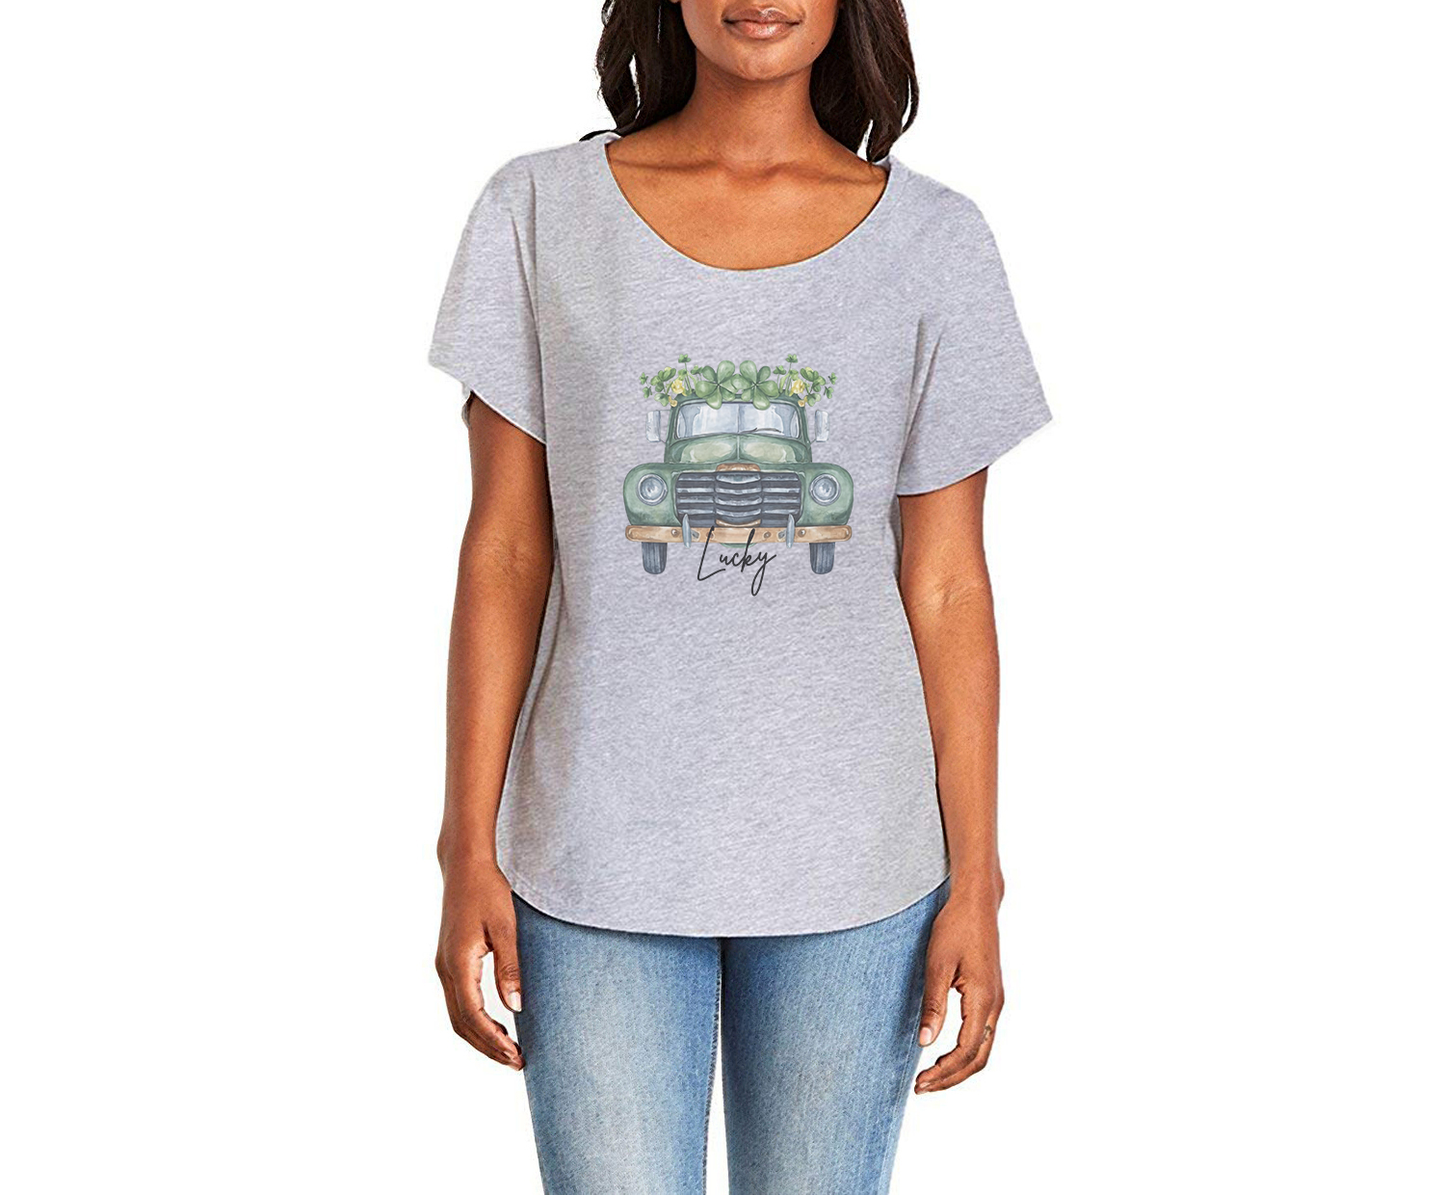 Lucky Vintage Truck Ladies Tee Shirt - In Grey & White